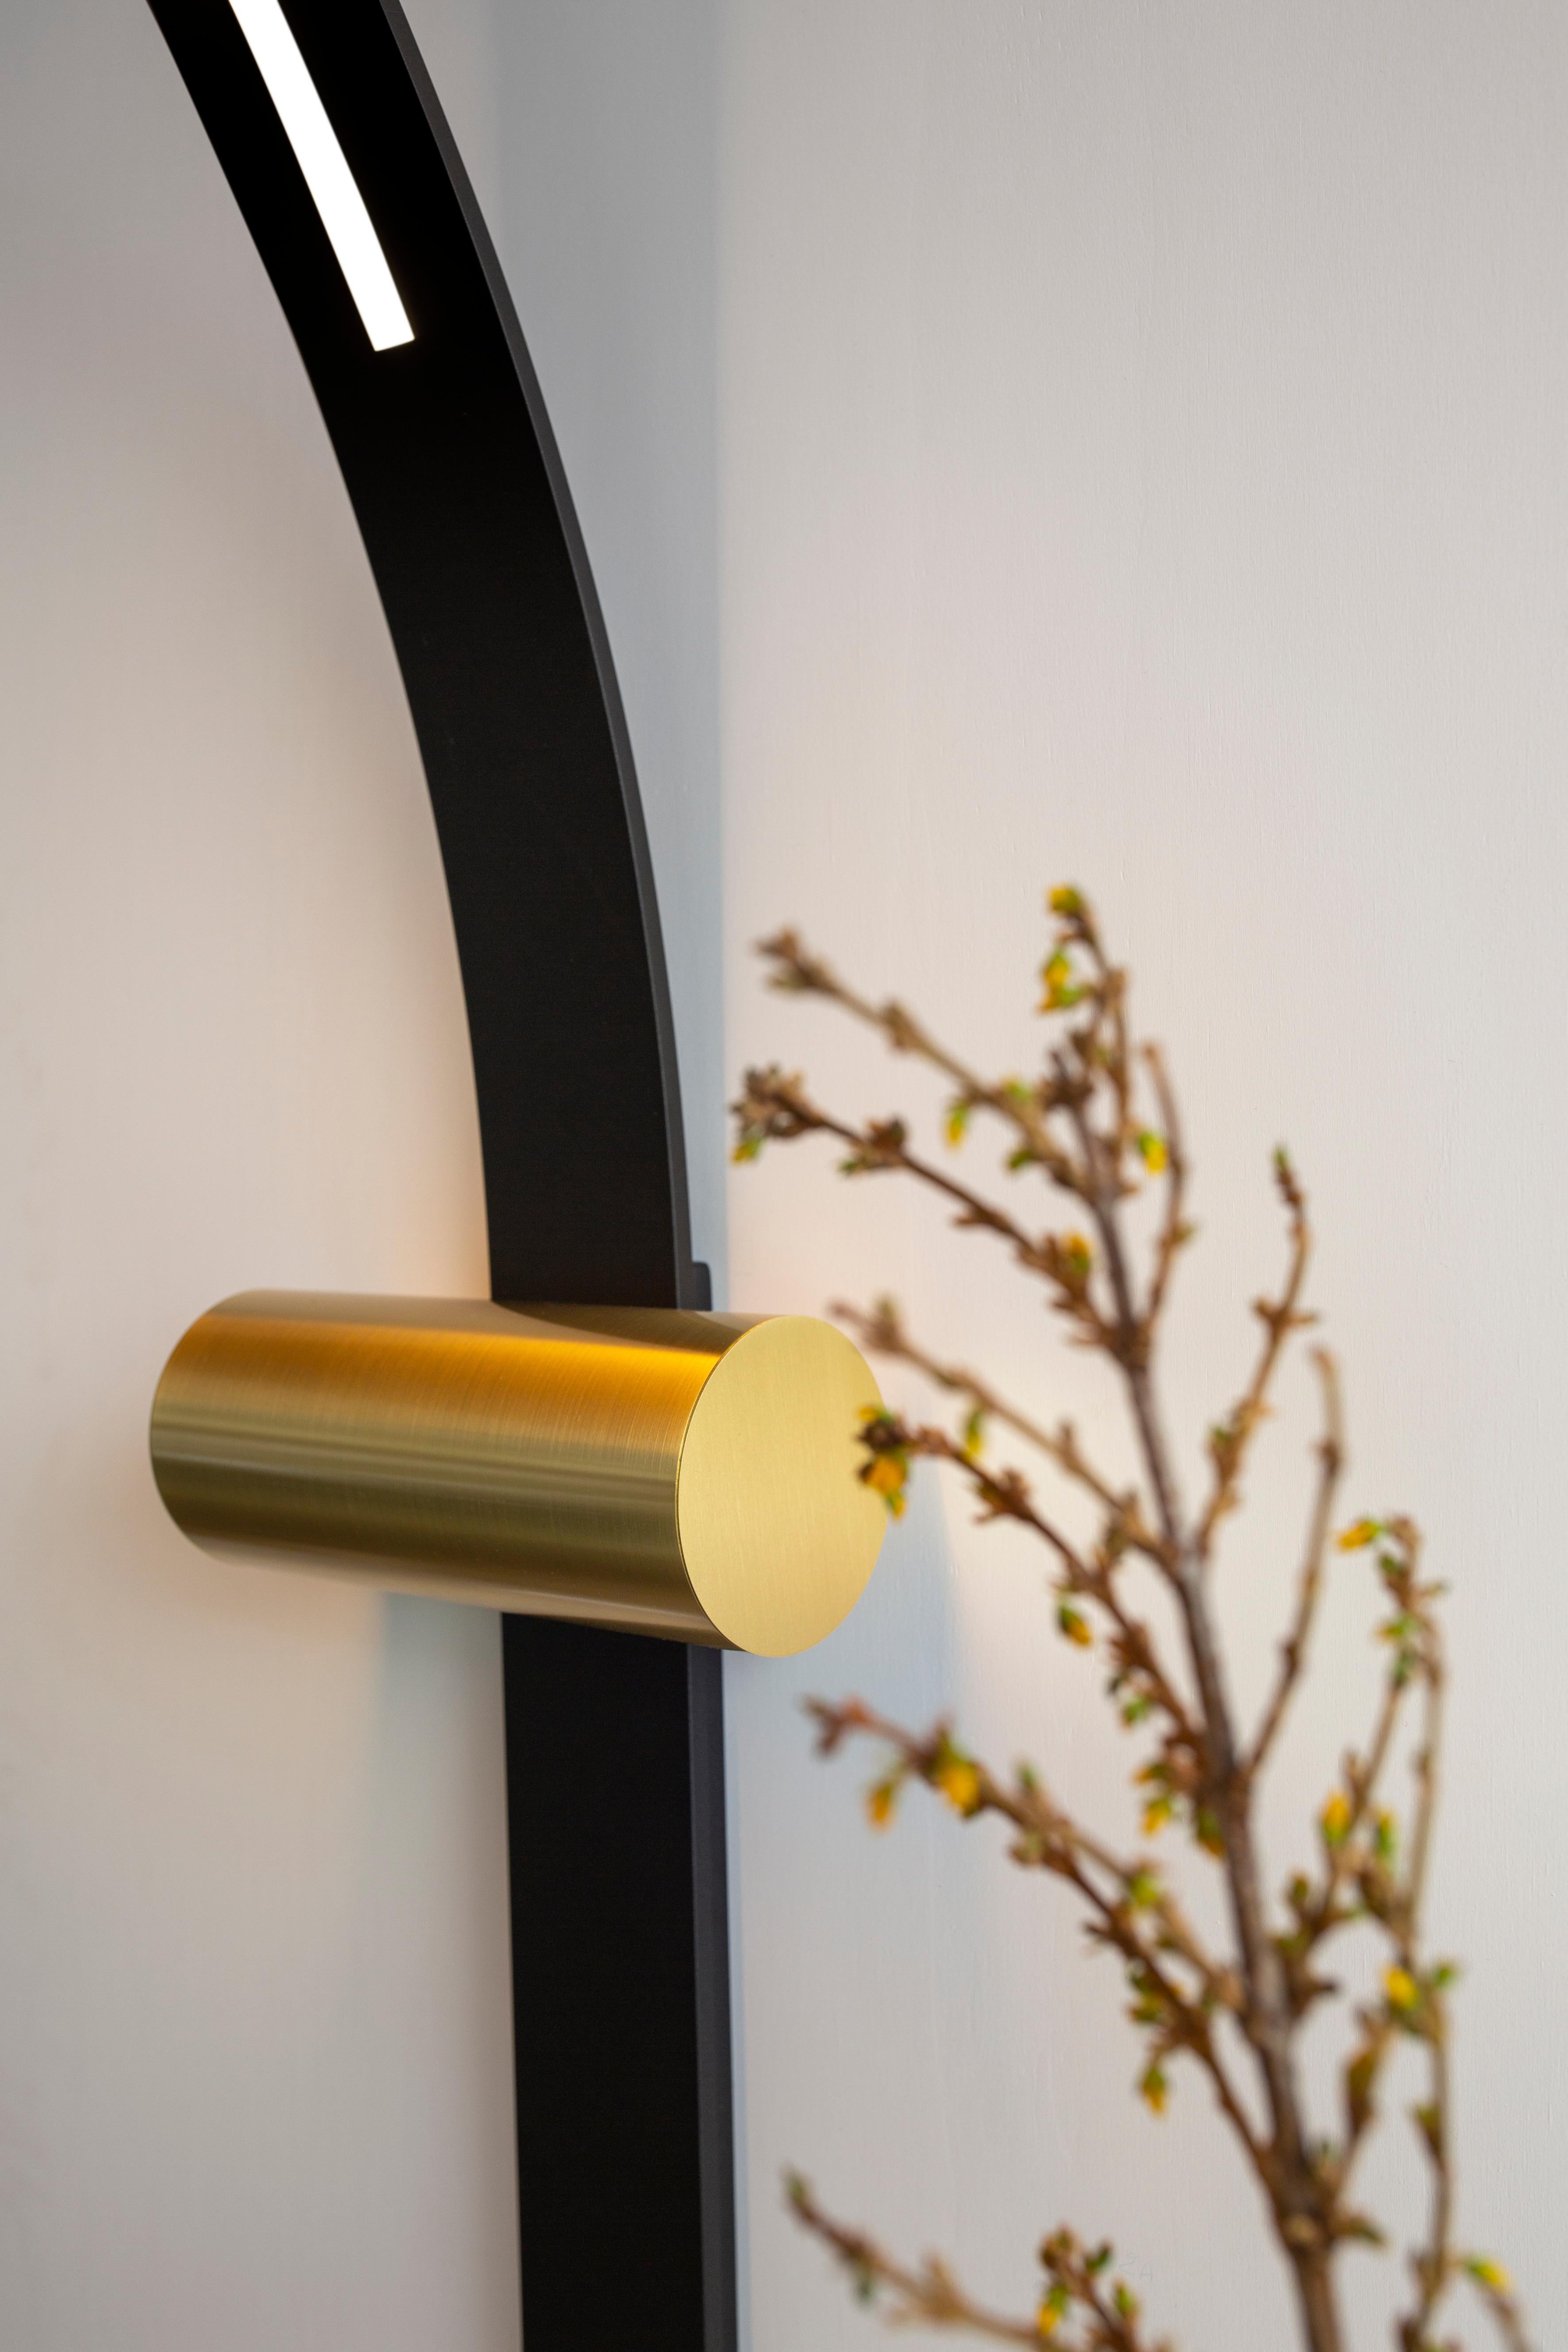 Metal Modern Wall Lamp 'Nastro 563.47' by Studiopepe x Tooy, Black & Brushed Brass For Sale